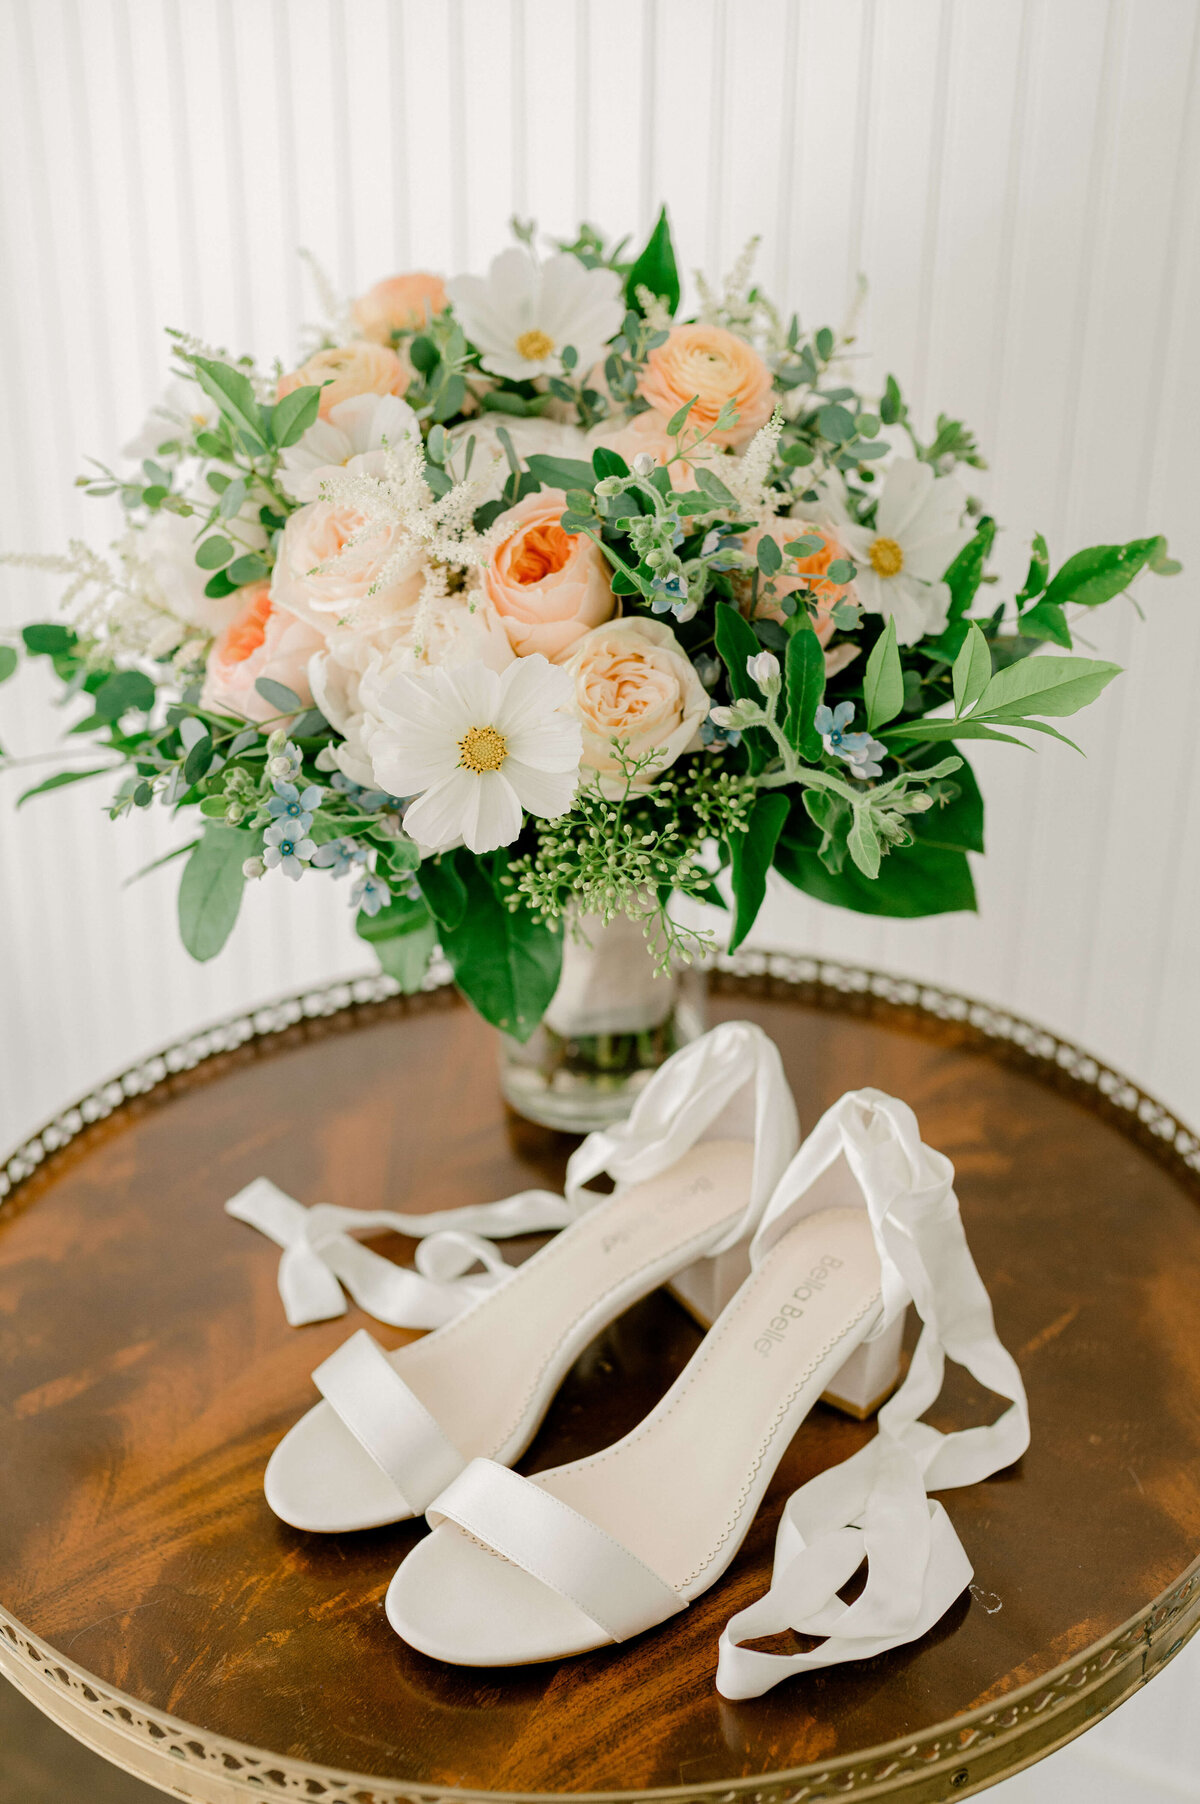 Image taken by DC photographer, Rachael Mattio of a pair of white Bella Belle bridal shoes sitting next to her peach and white bridal bouquet.